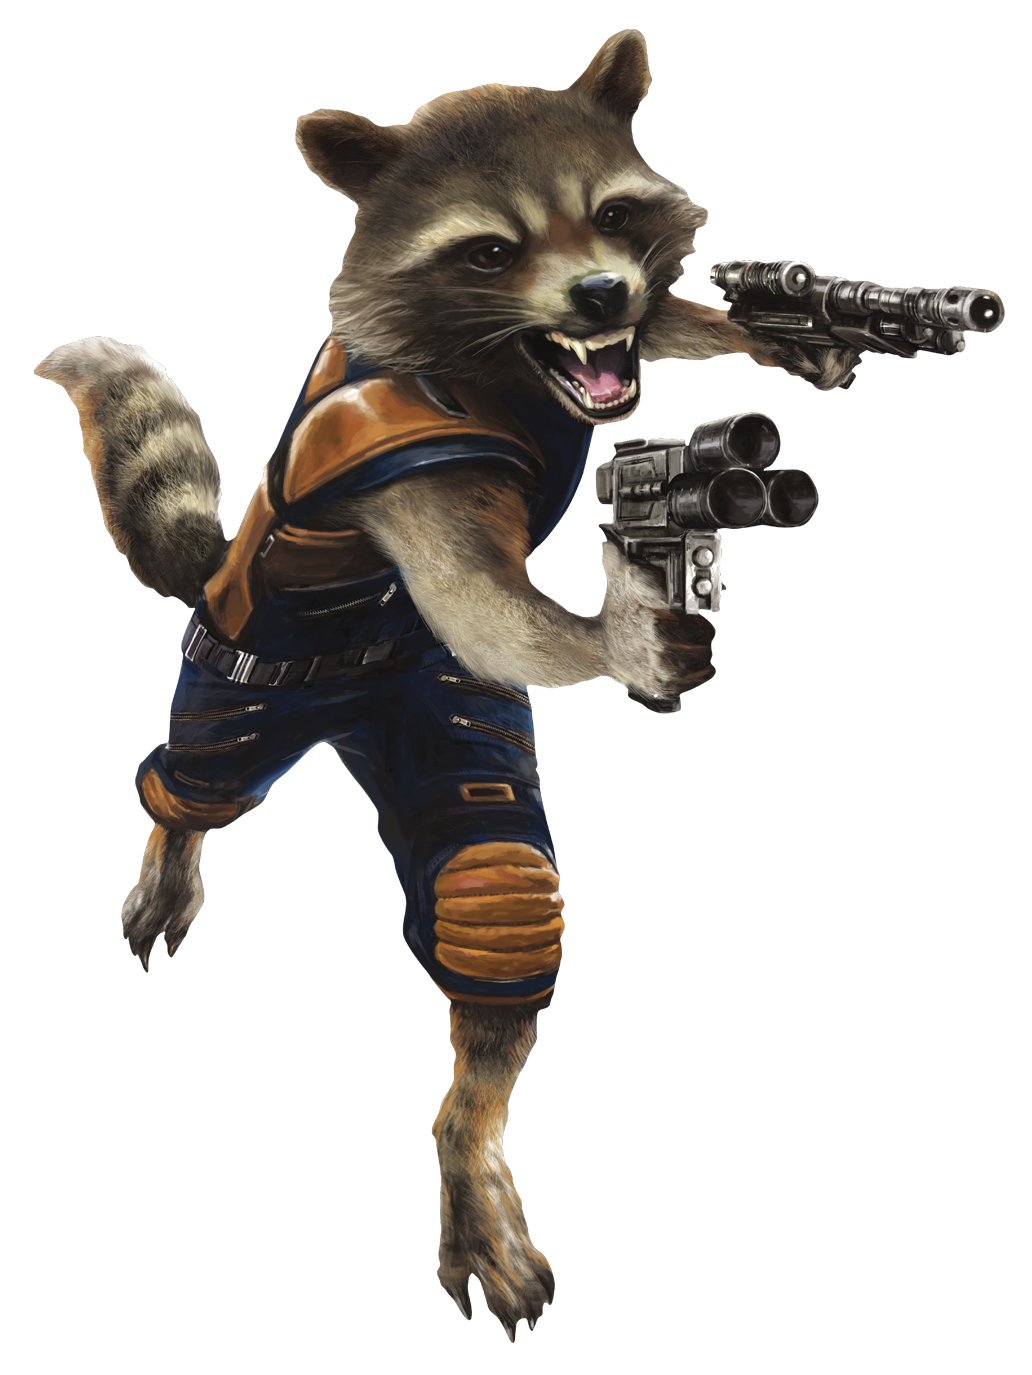 Image - Guardians of the galaxy vol2 rocket racoon.png | Marvel Movies